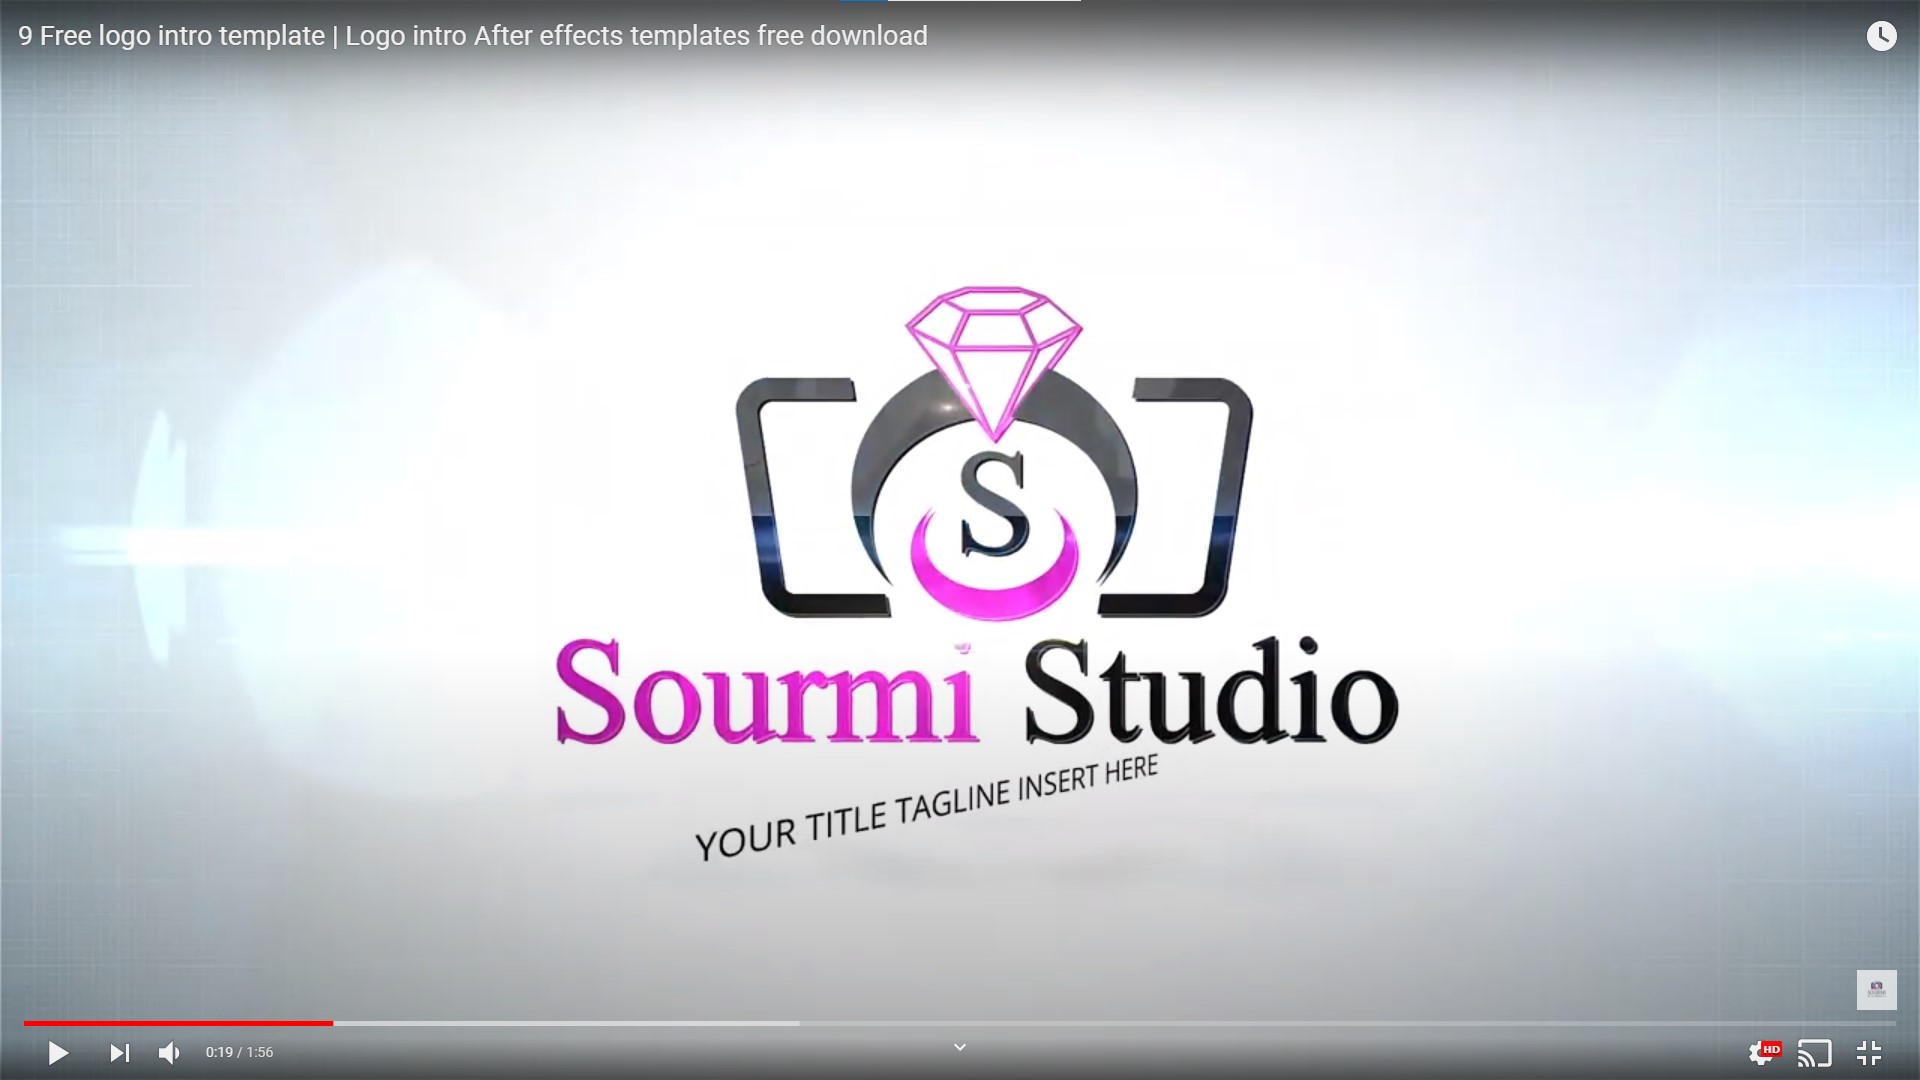 adobe after effects logo intro templates free